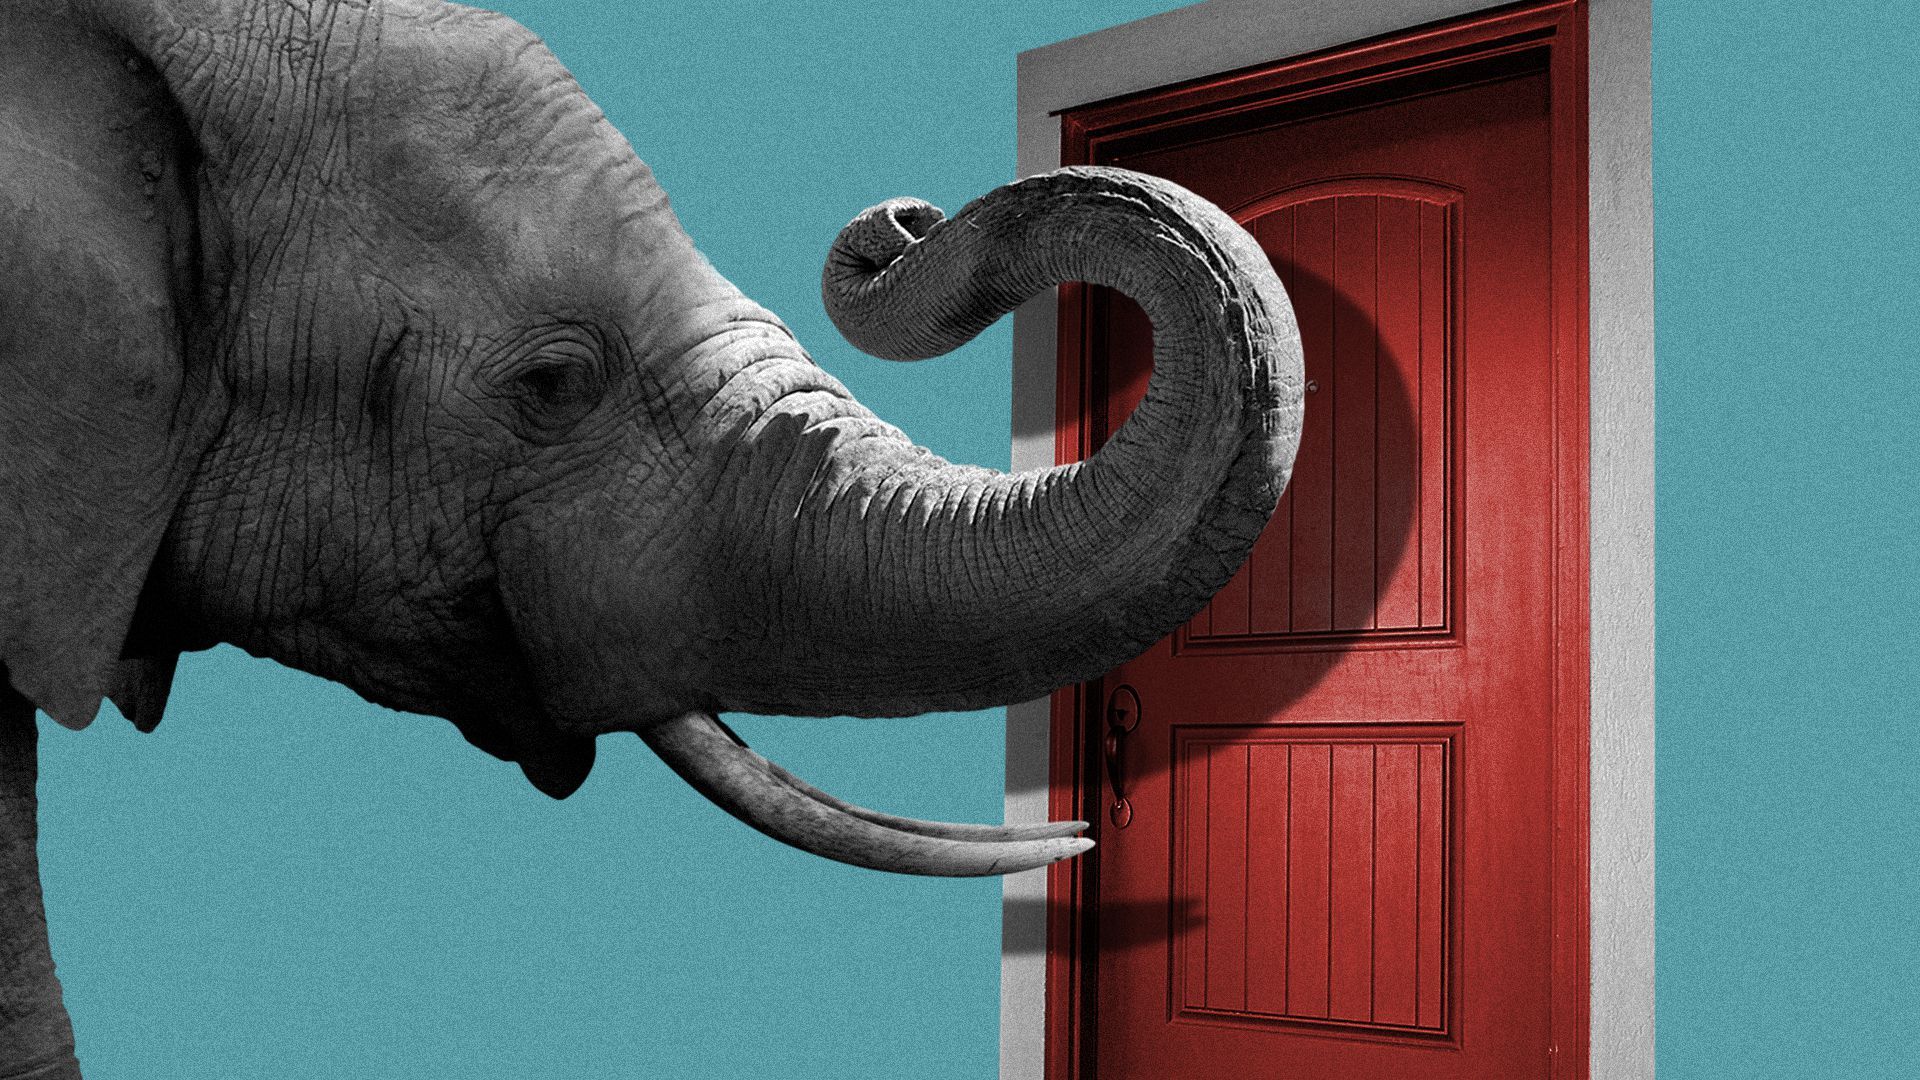 Illustration of an elephant knocking on a door.